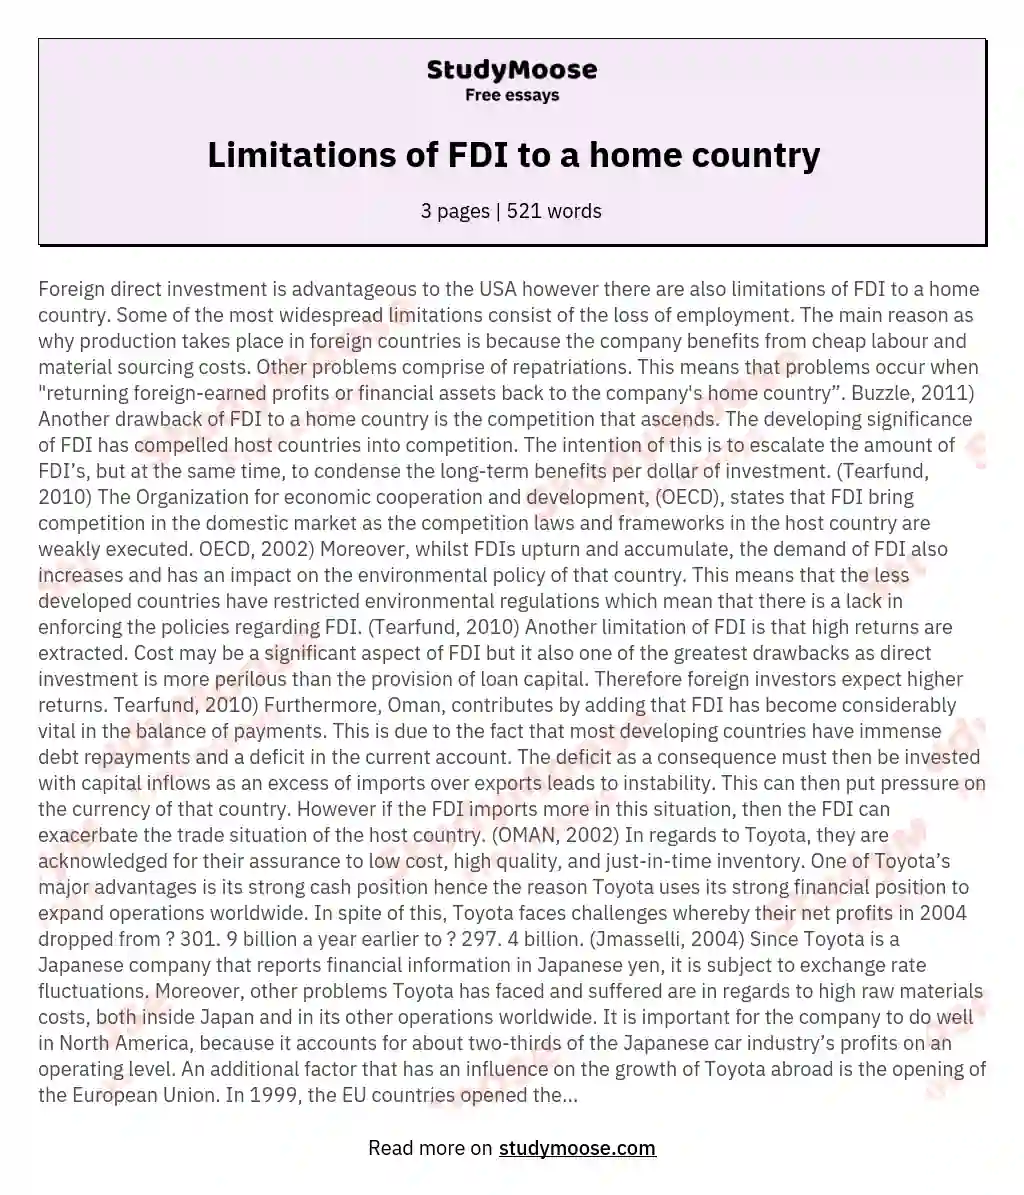 Limitations of FDI to a home country essay